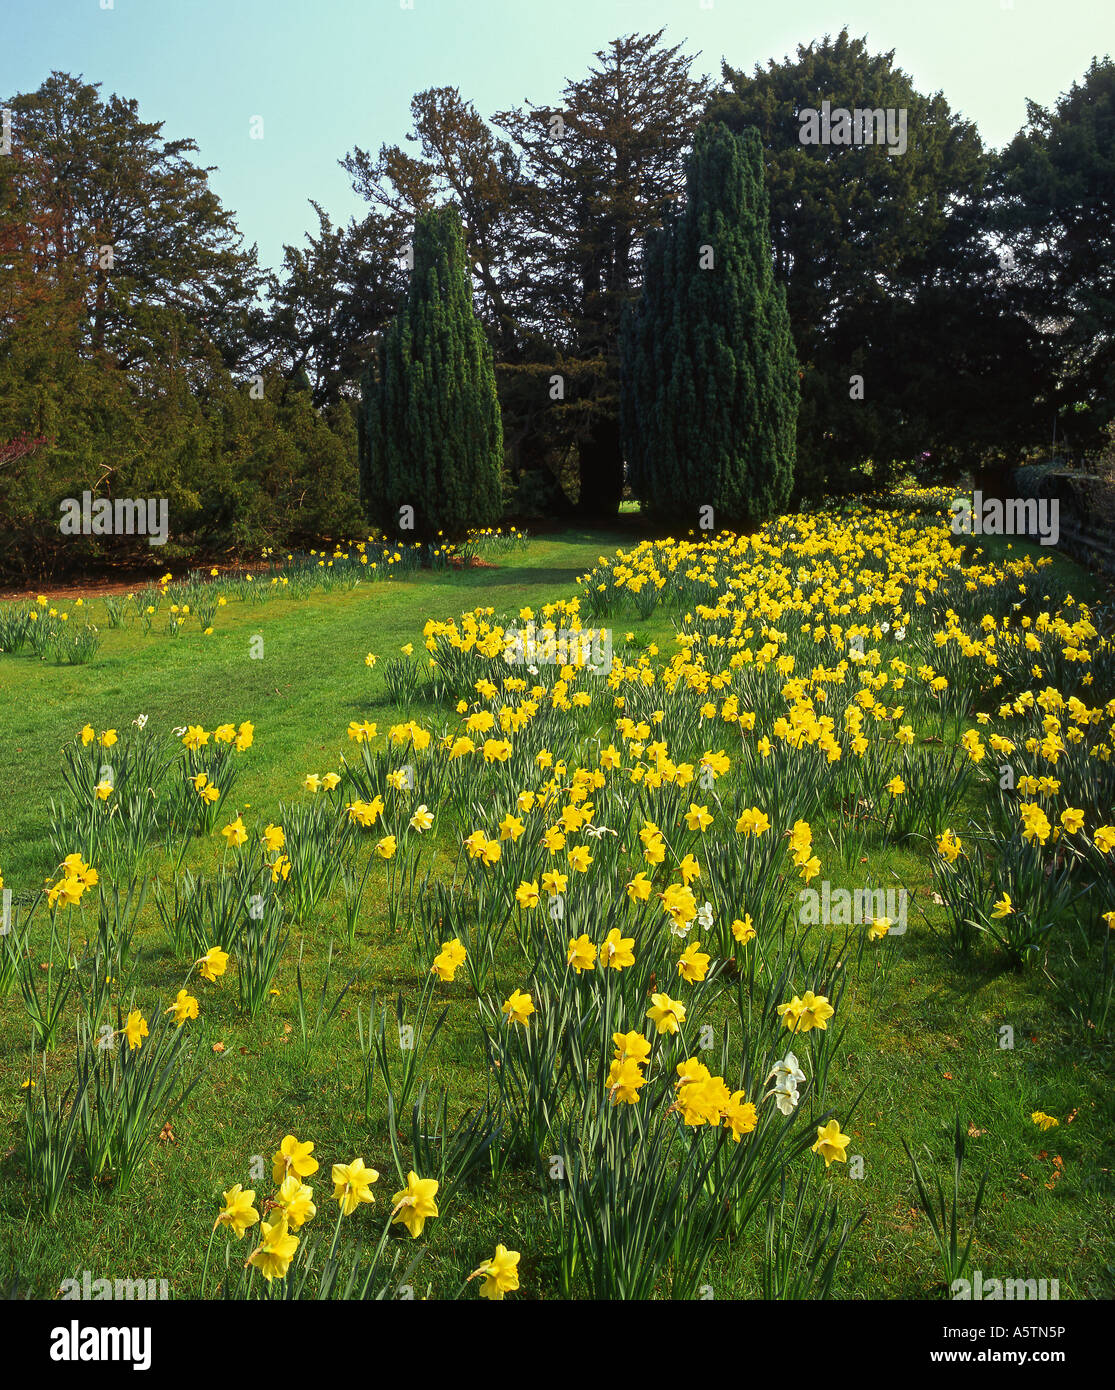 The Glade, Arley Hall and Gardens, Near Knutsford, Cheshire, England, UK Stock Photo